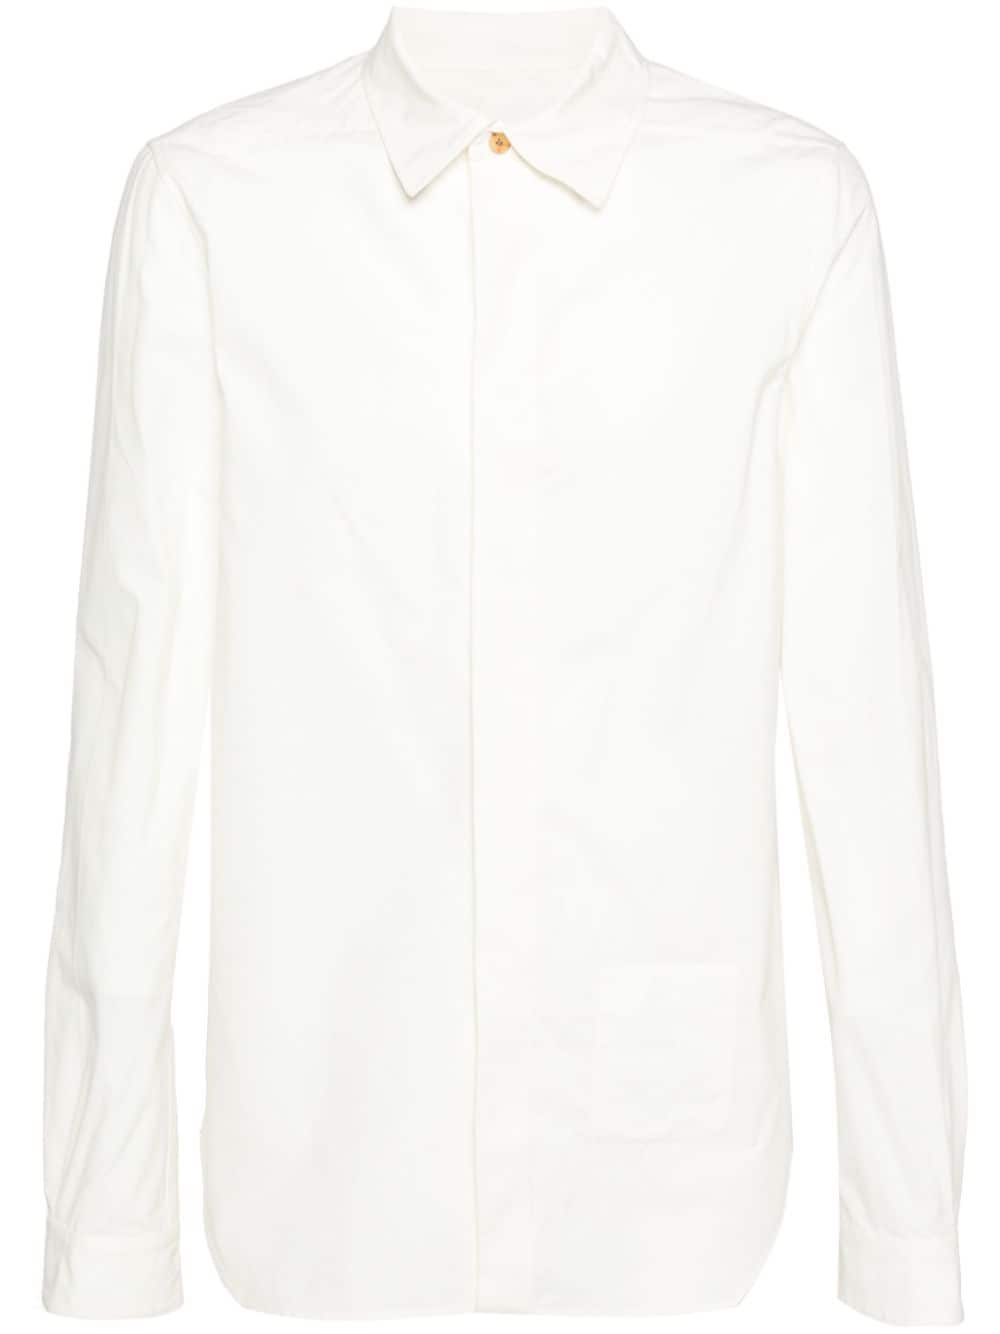 Rick Owens X Bonotto Office Cotton Shirt In White